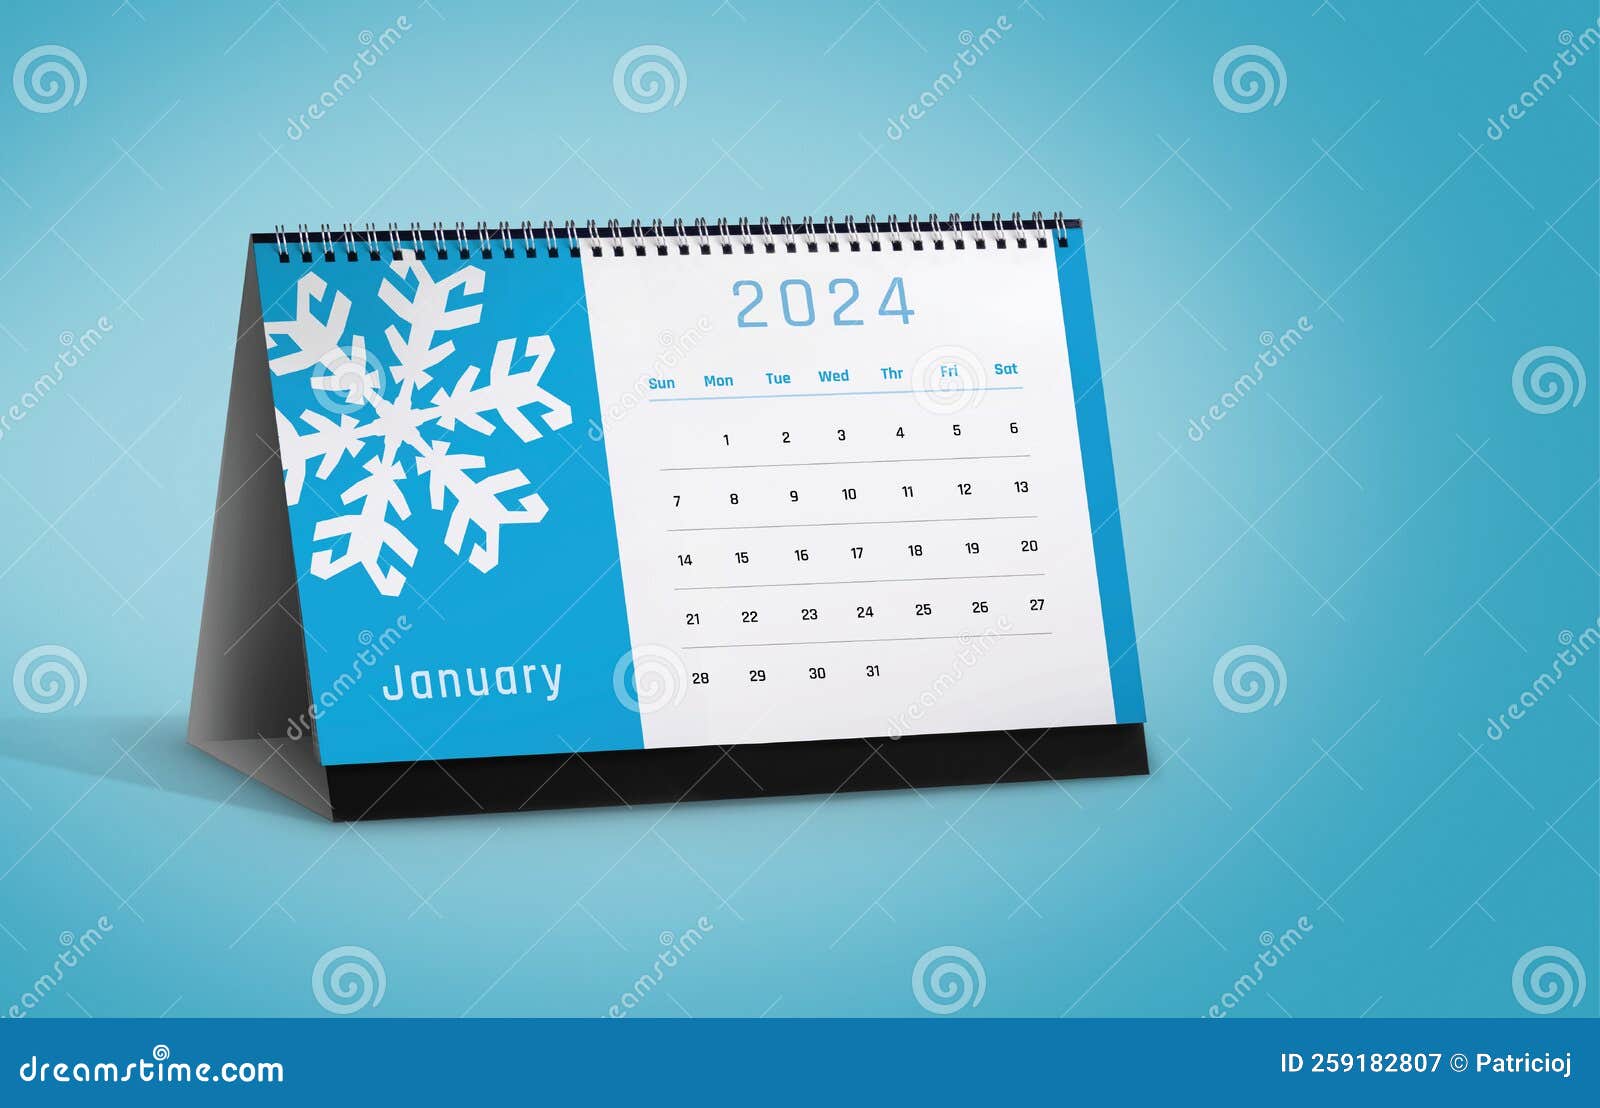 January 2024 Calendar with Snowflake Icon Isolated on Blue Background